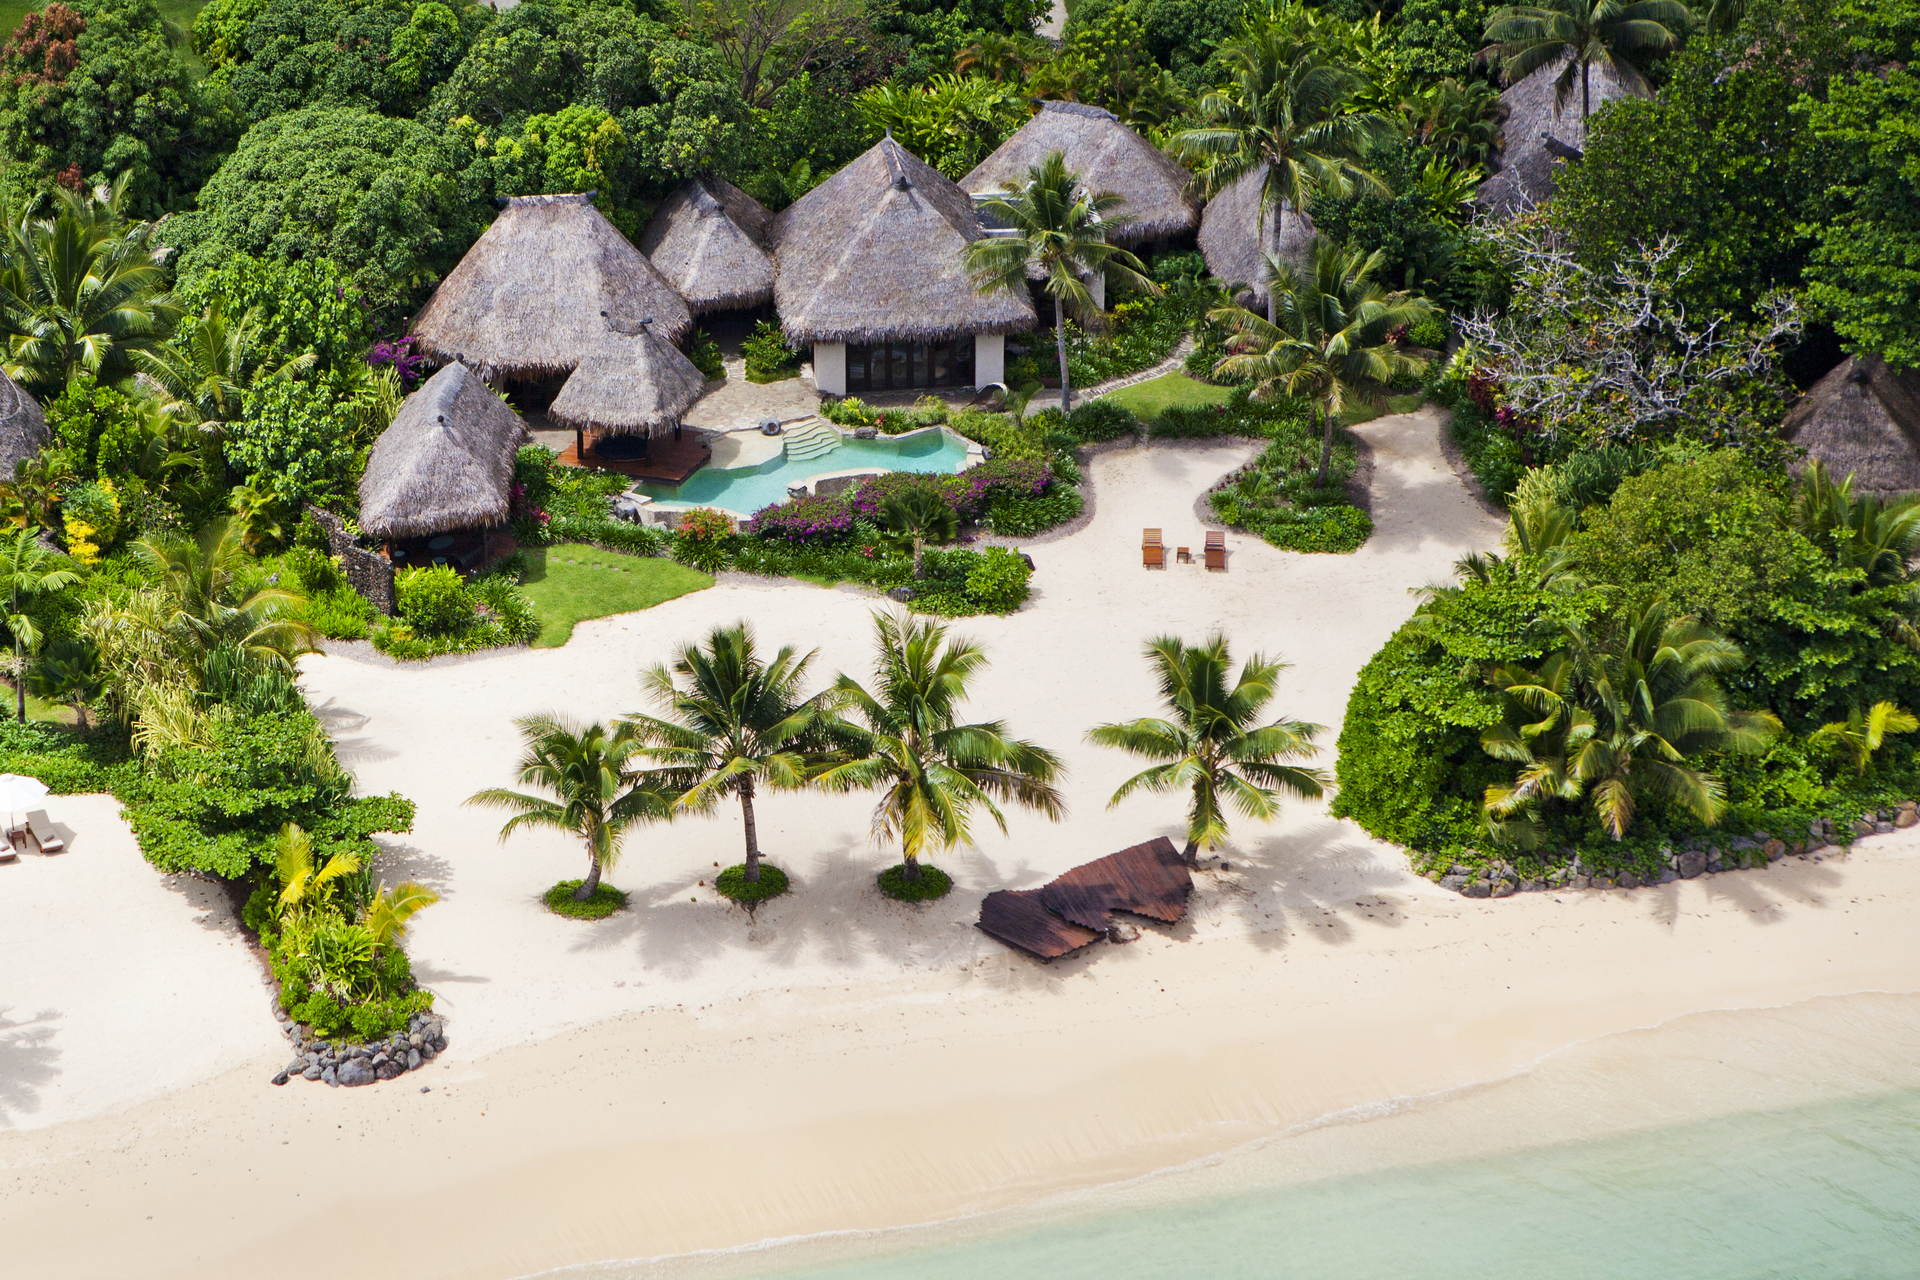 laucala island from the air, beach, palm trees and hotel resort